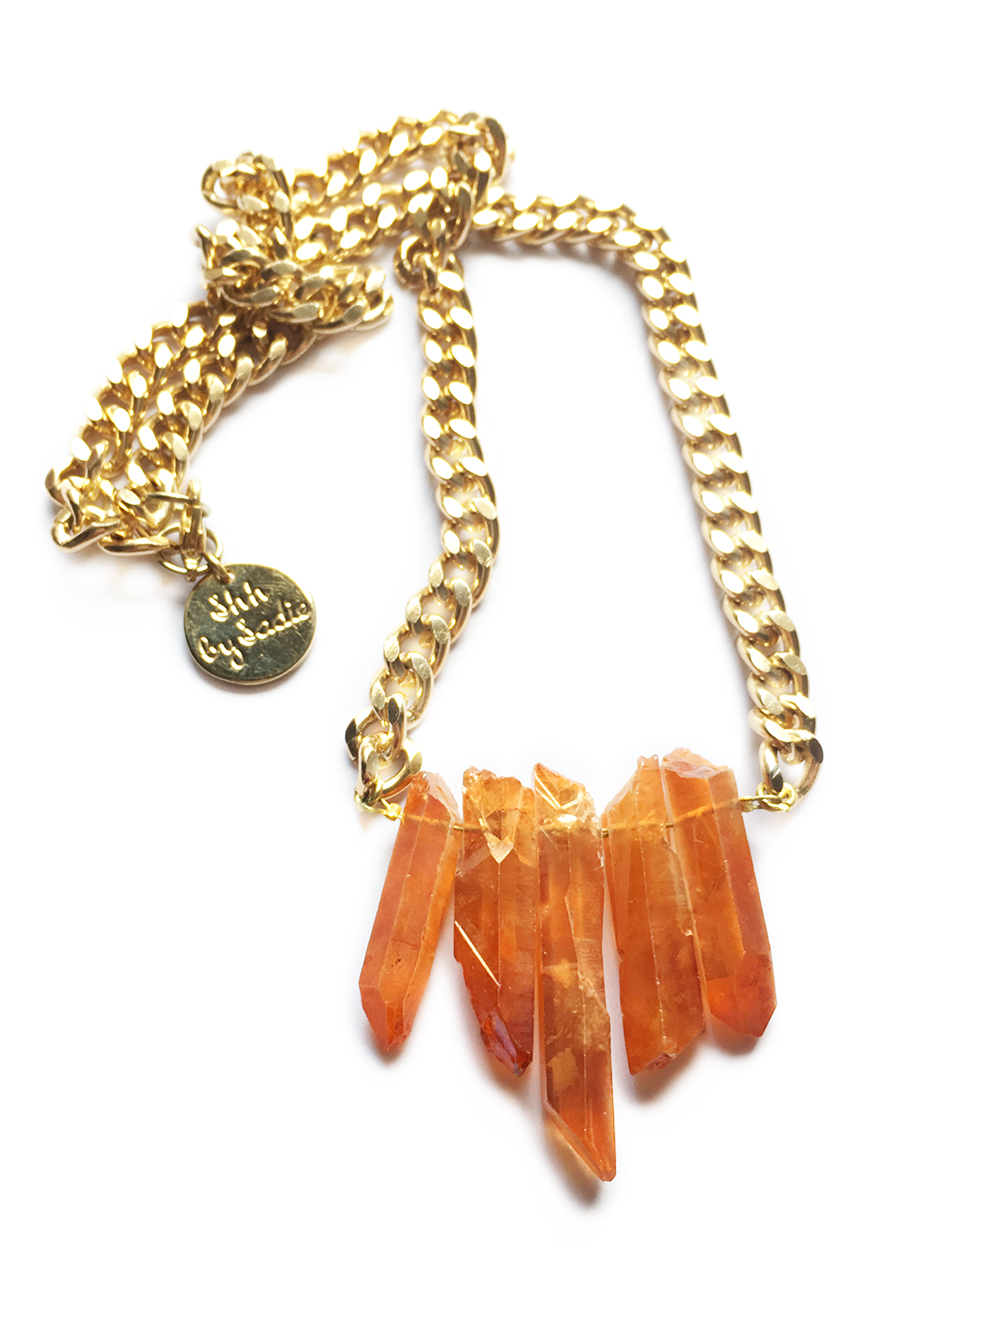 Amber crystal quartz necklace handmade in UK by shh by sadie designer jewellery